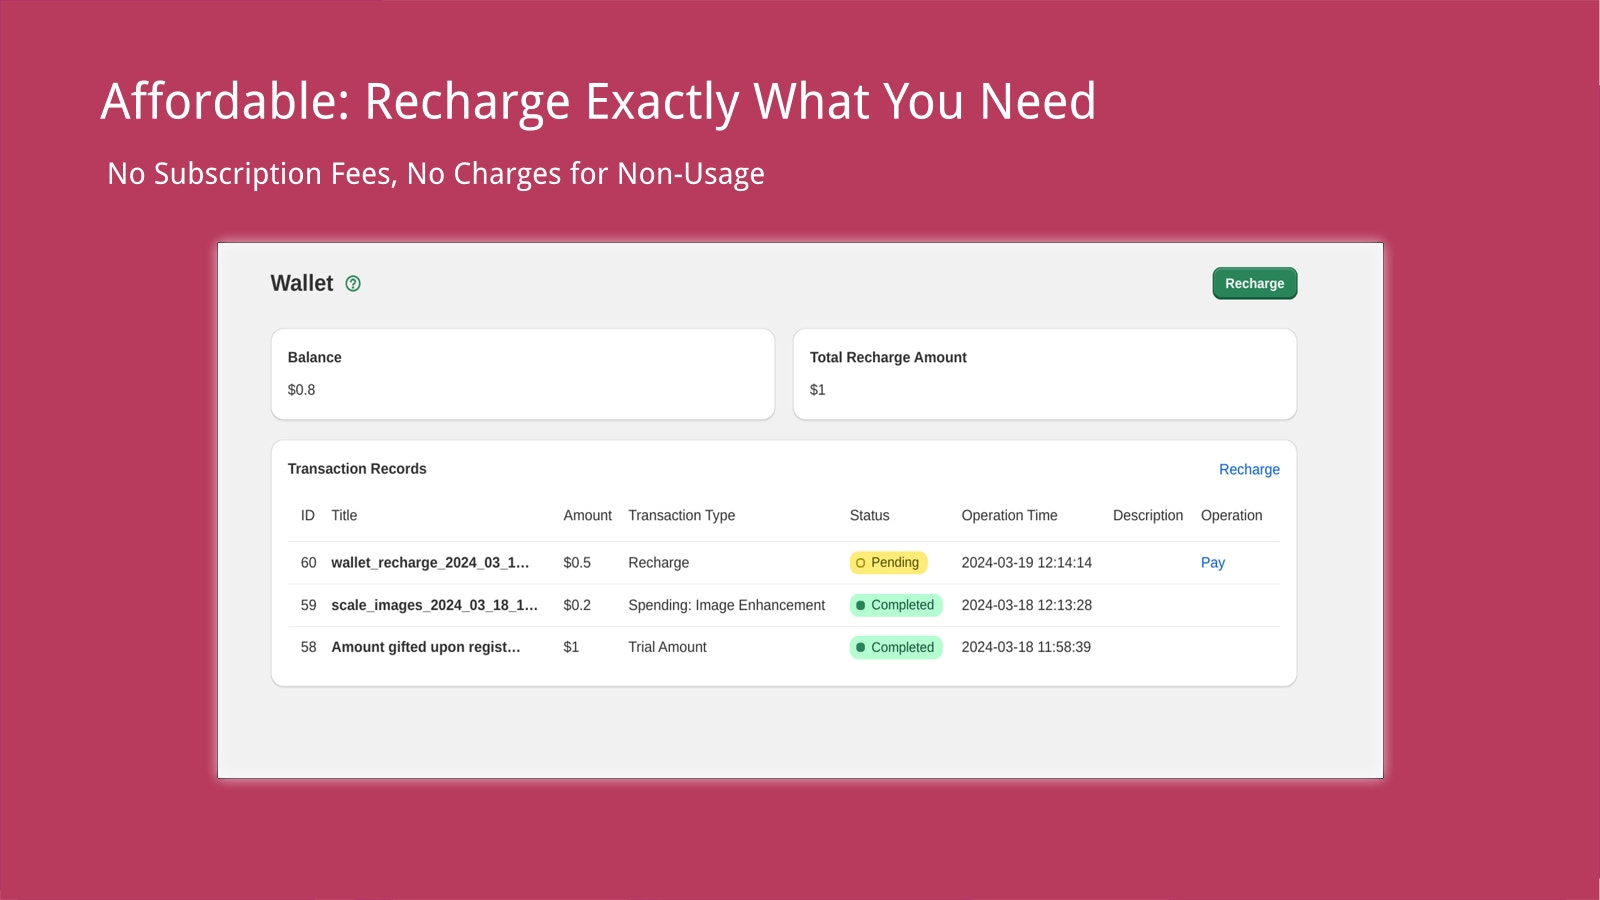 Affordable: Recharge Exactly What You Need